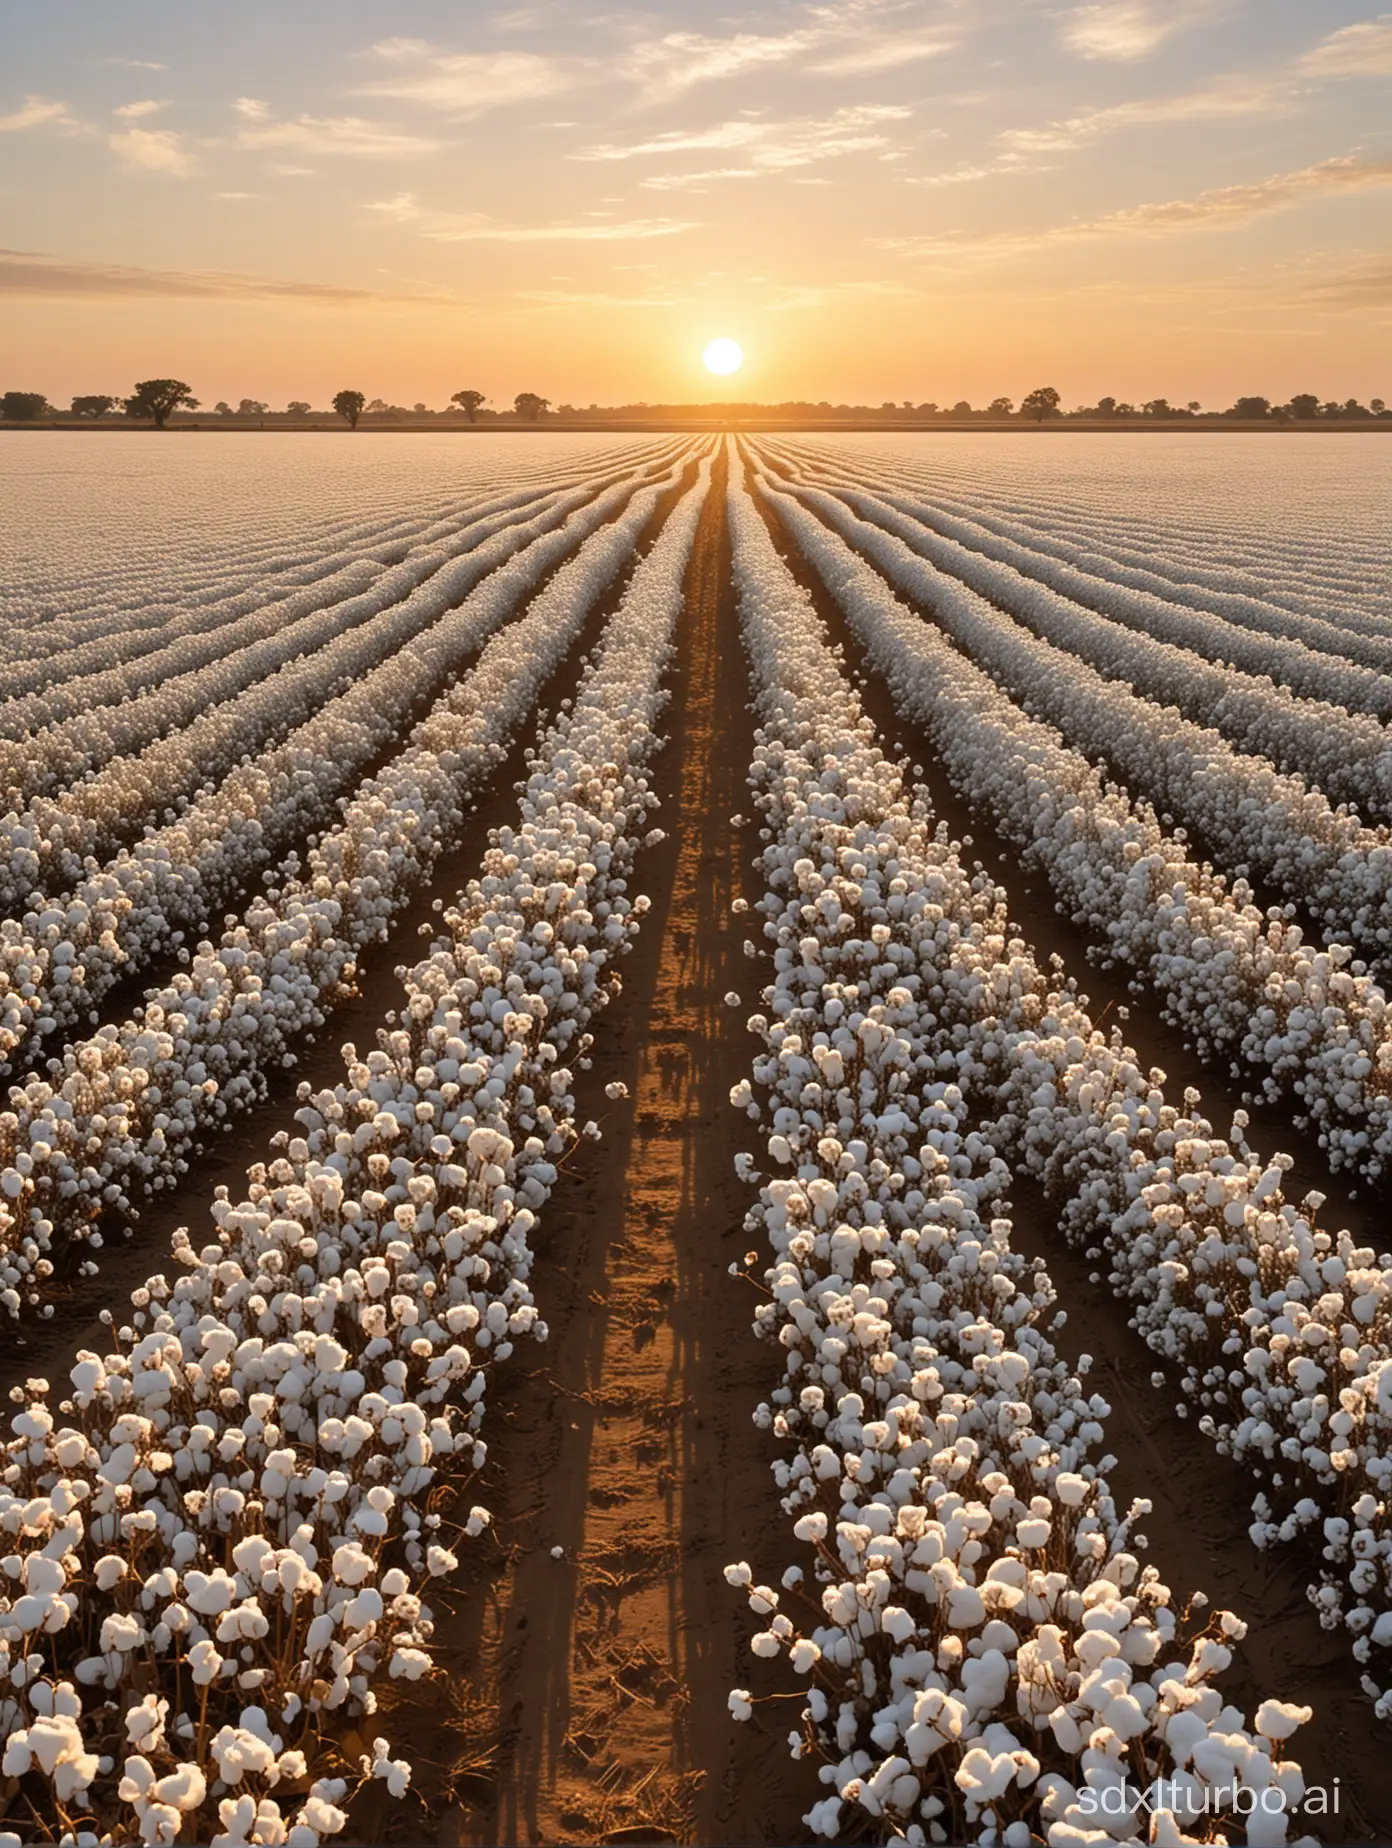 Prompt in English:
"Visualize a scene of cotton harvesting where a vast field stretches out, with endless rows of white plants disappearing into the horizon. The setting sun gently gilds the soft plumes, creating a visual spectacle of serene and tranquil beauty. Each cotton plant stands tall and proud, its fluffy white bolls swaying gently in the breeze. The distant horizon seems to beckon, inviting you to wander into the endless expanse of the field. As the golden light of sunset bathes the landscape, casting long shadows across the rows of cotton, a sense of peace washes over you, as if time itself has slowed down to savor the moment. It's a scene of simple yet profound beauty, reminiscent of the quiet majesty of rural landscapes captured by artists like Andrew Wyeth, who found inspiration in the simplicity of everyday life."
